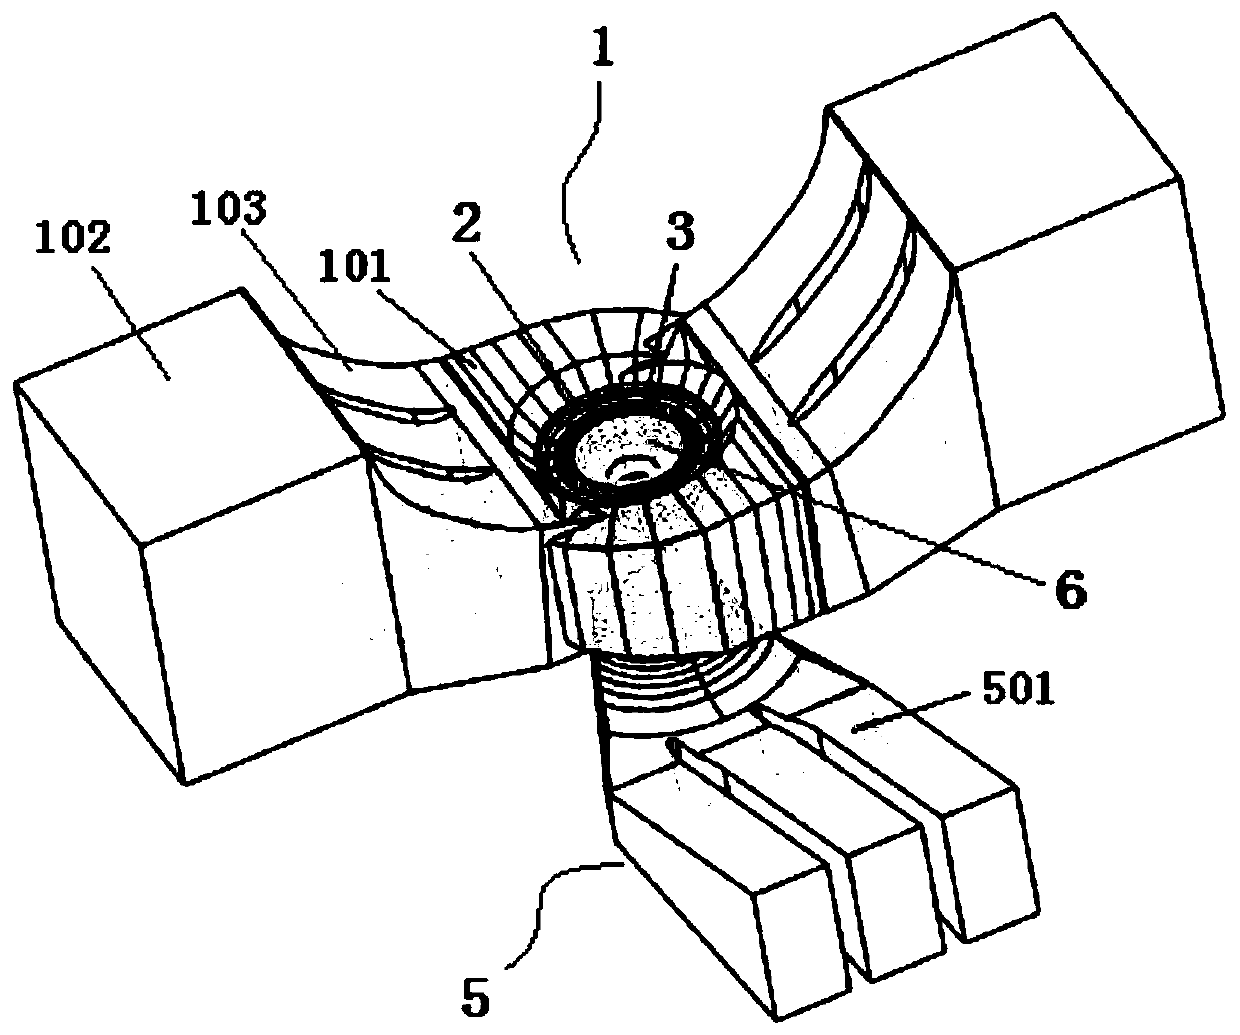 High-specific-speed axial flow water turbine with double-inlet volute